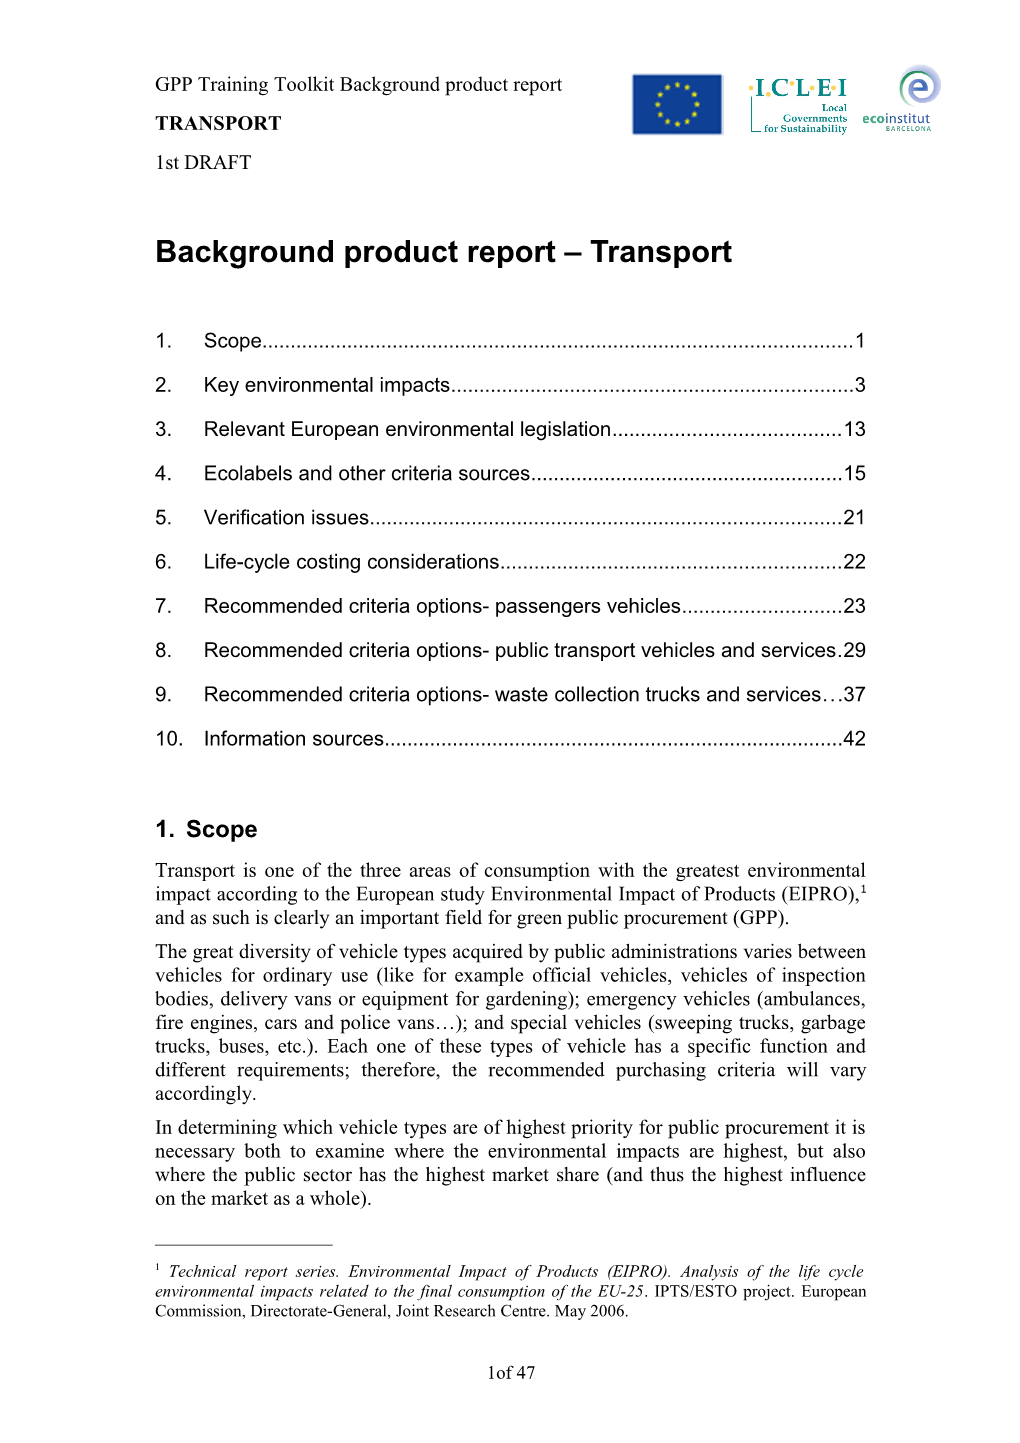 Background Product Report - Transport